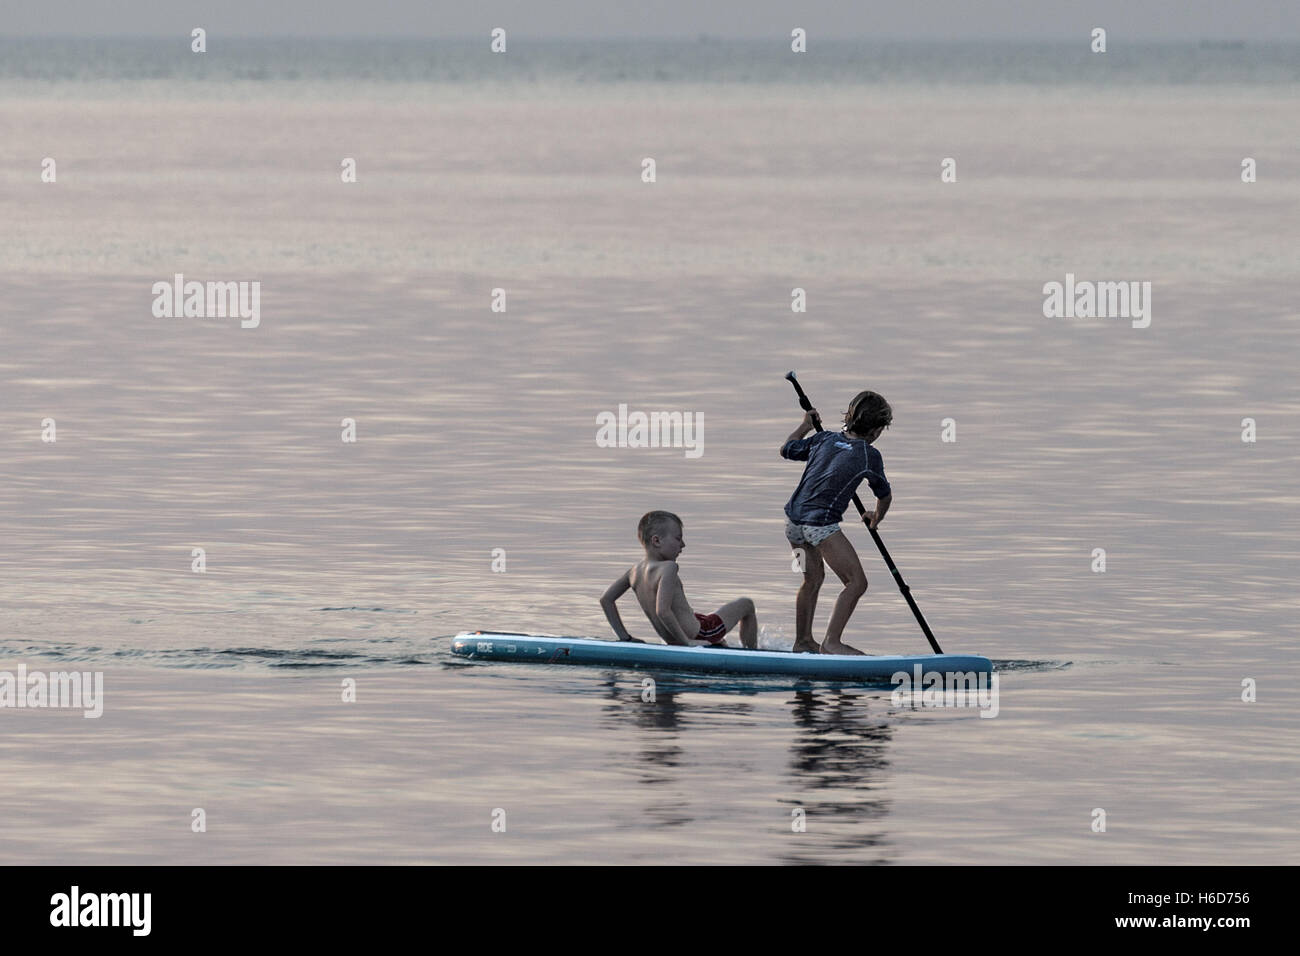 Boys playing on a surfboard, dusk, Kep, Cambodia Stock Photo